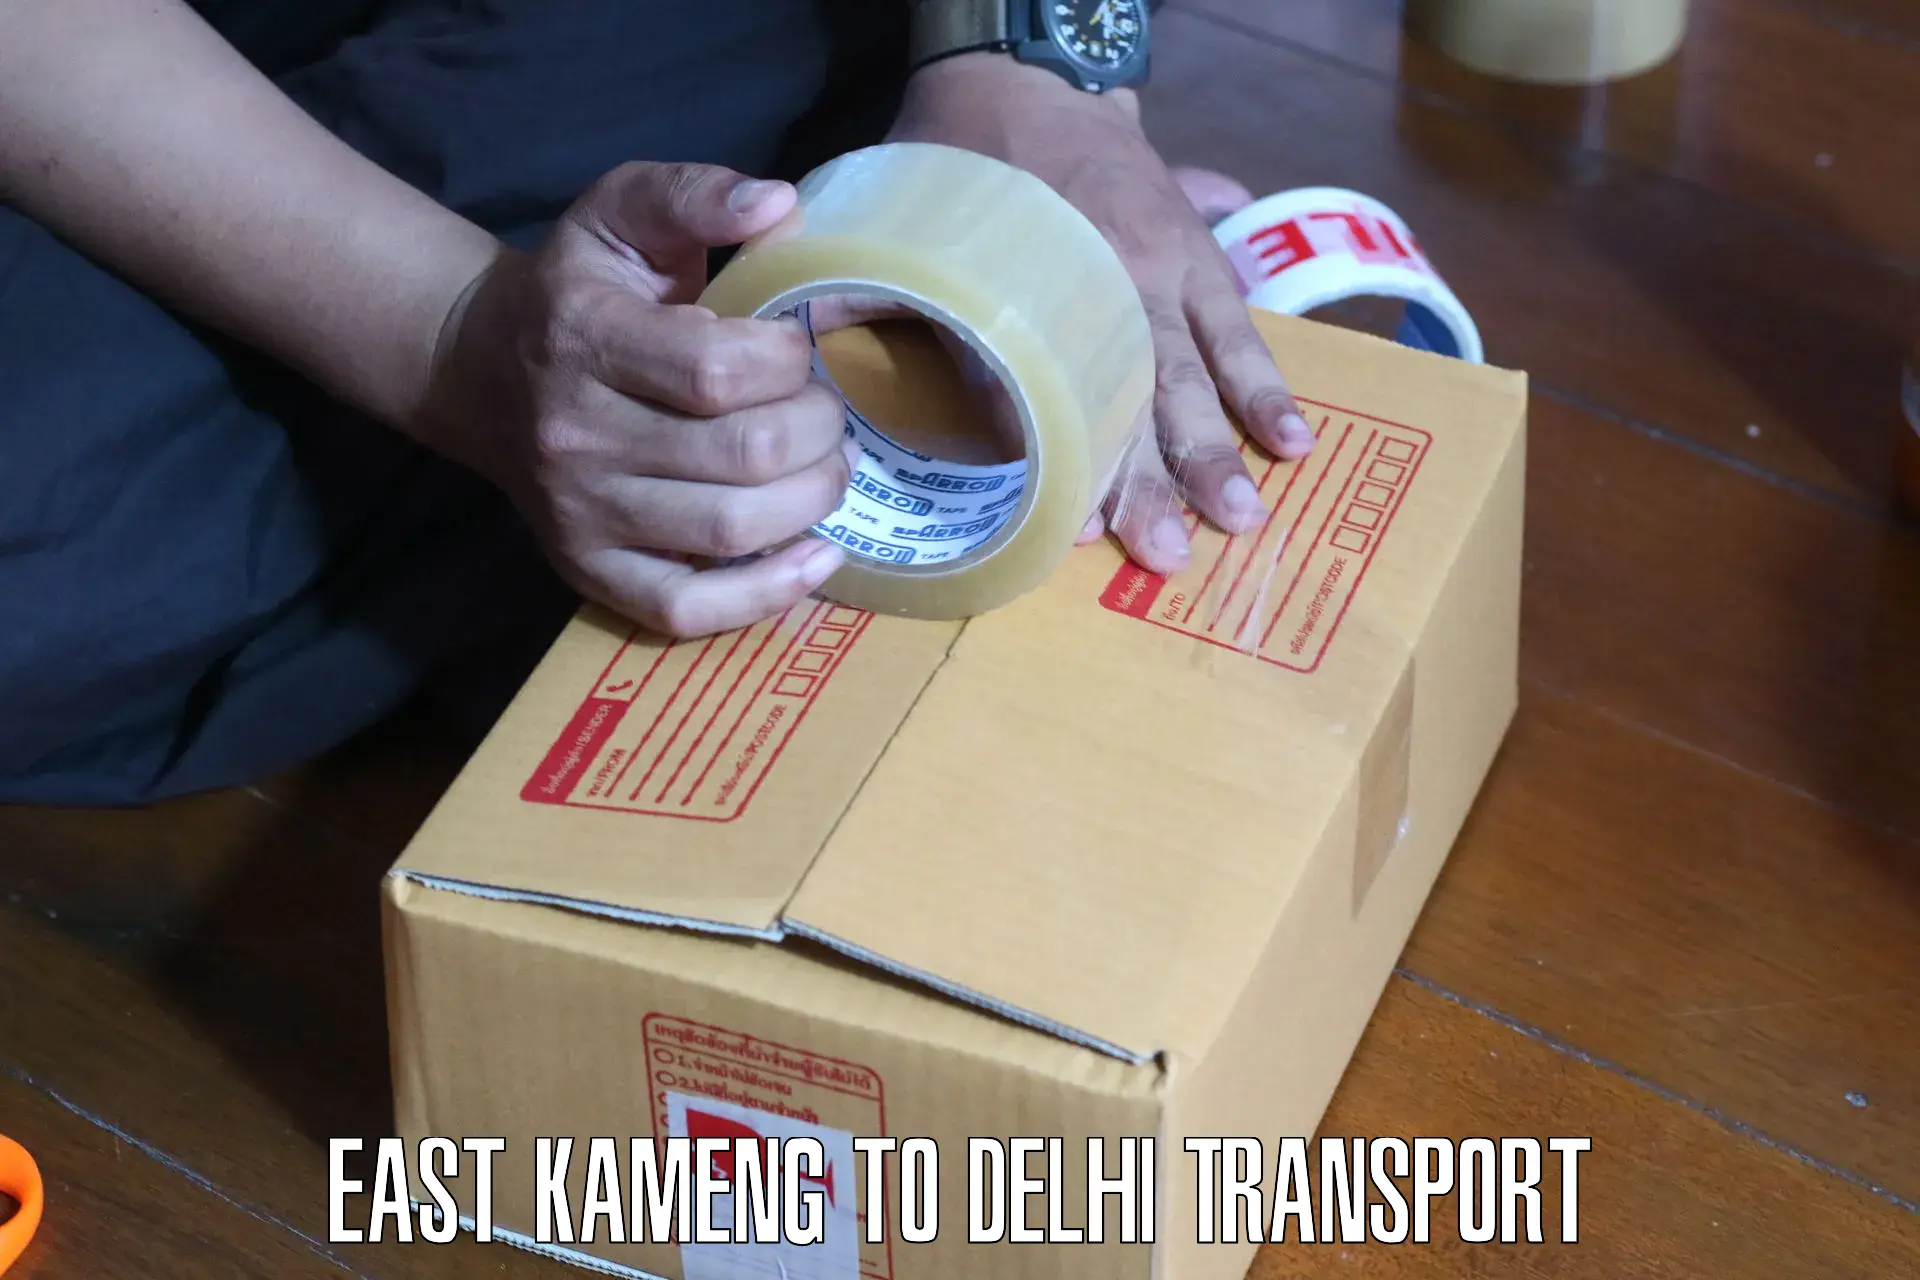 Container transport service East Kameng to Delhi